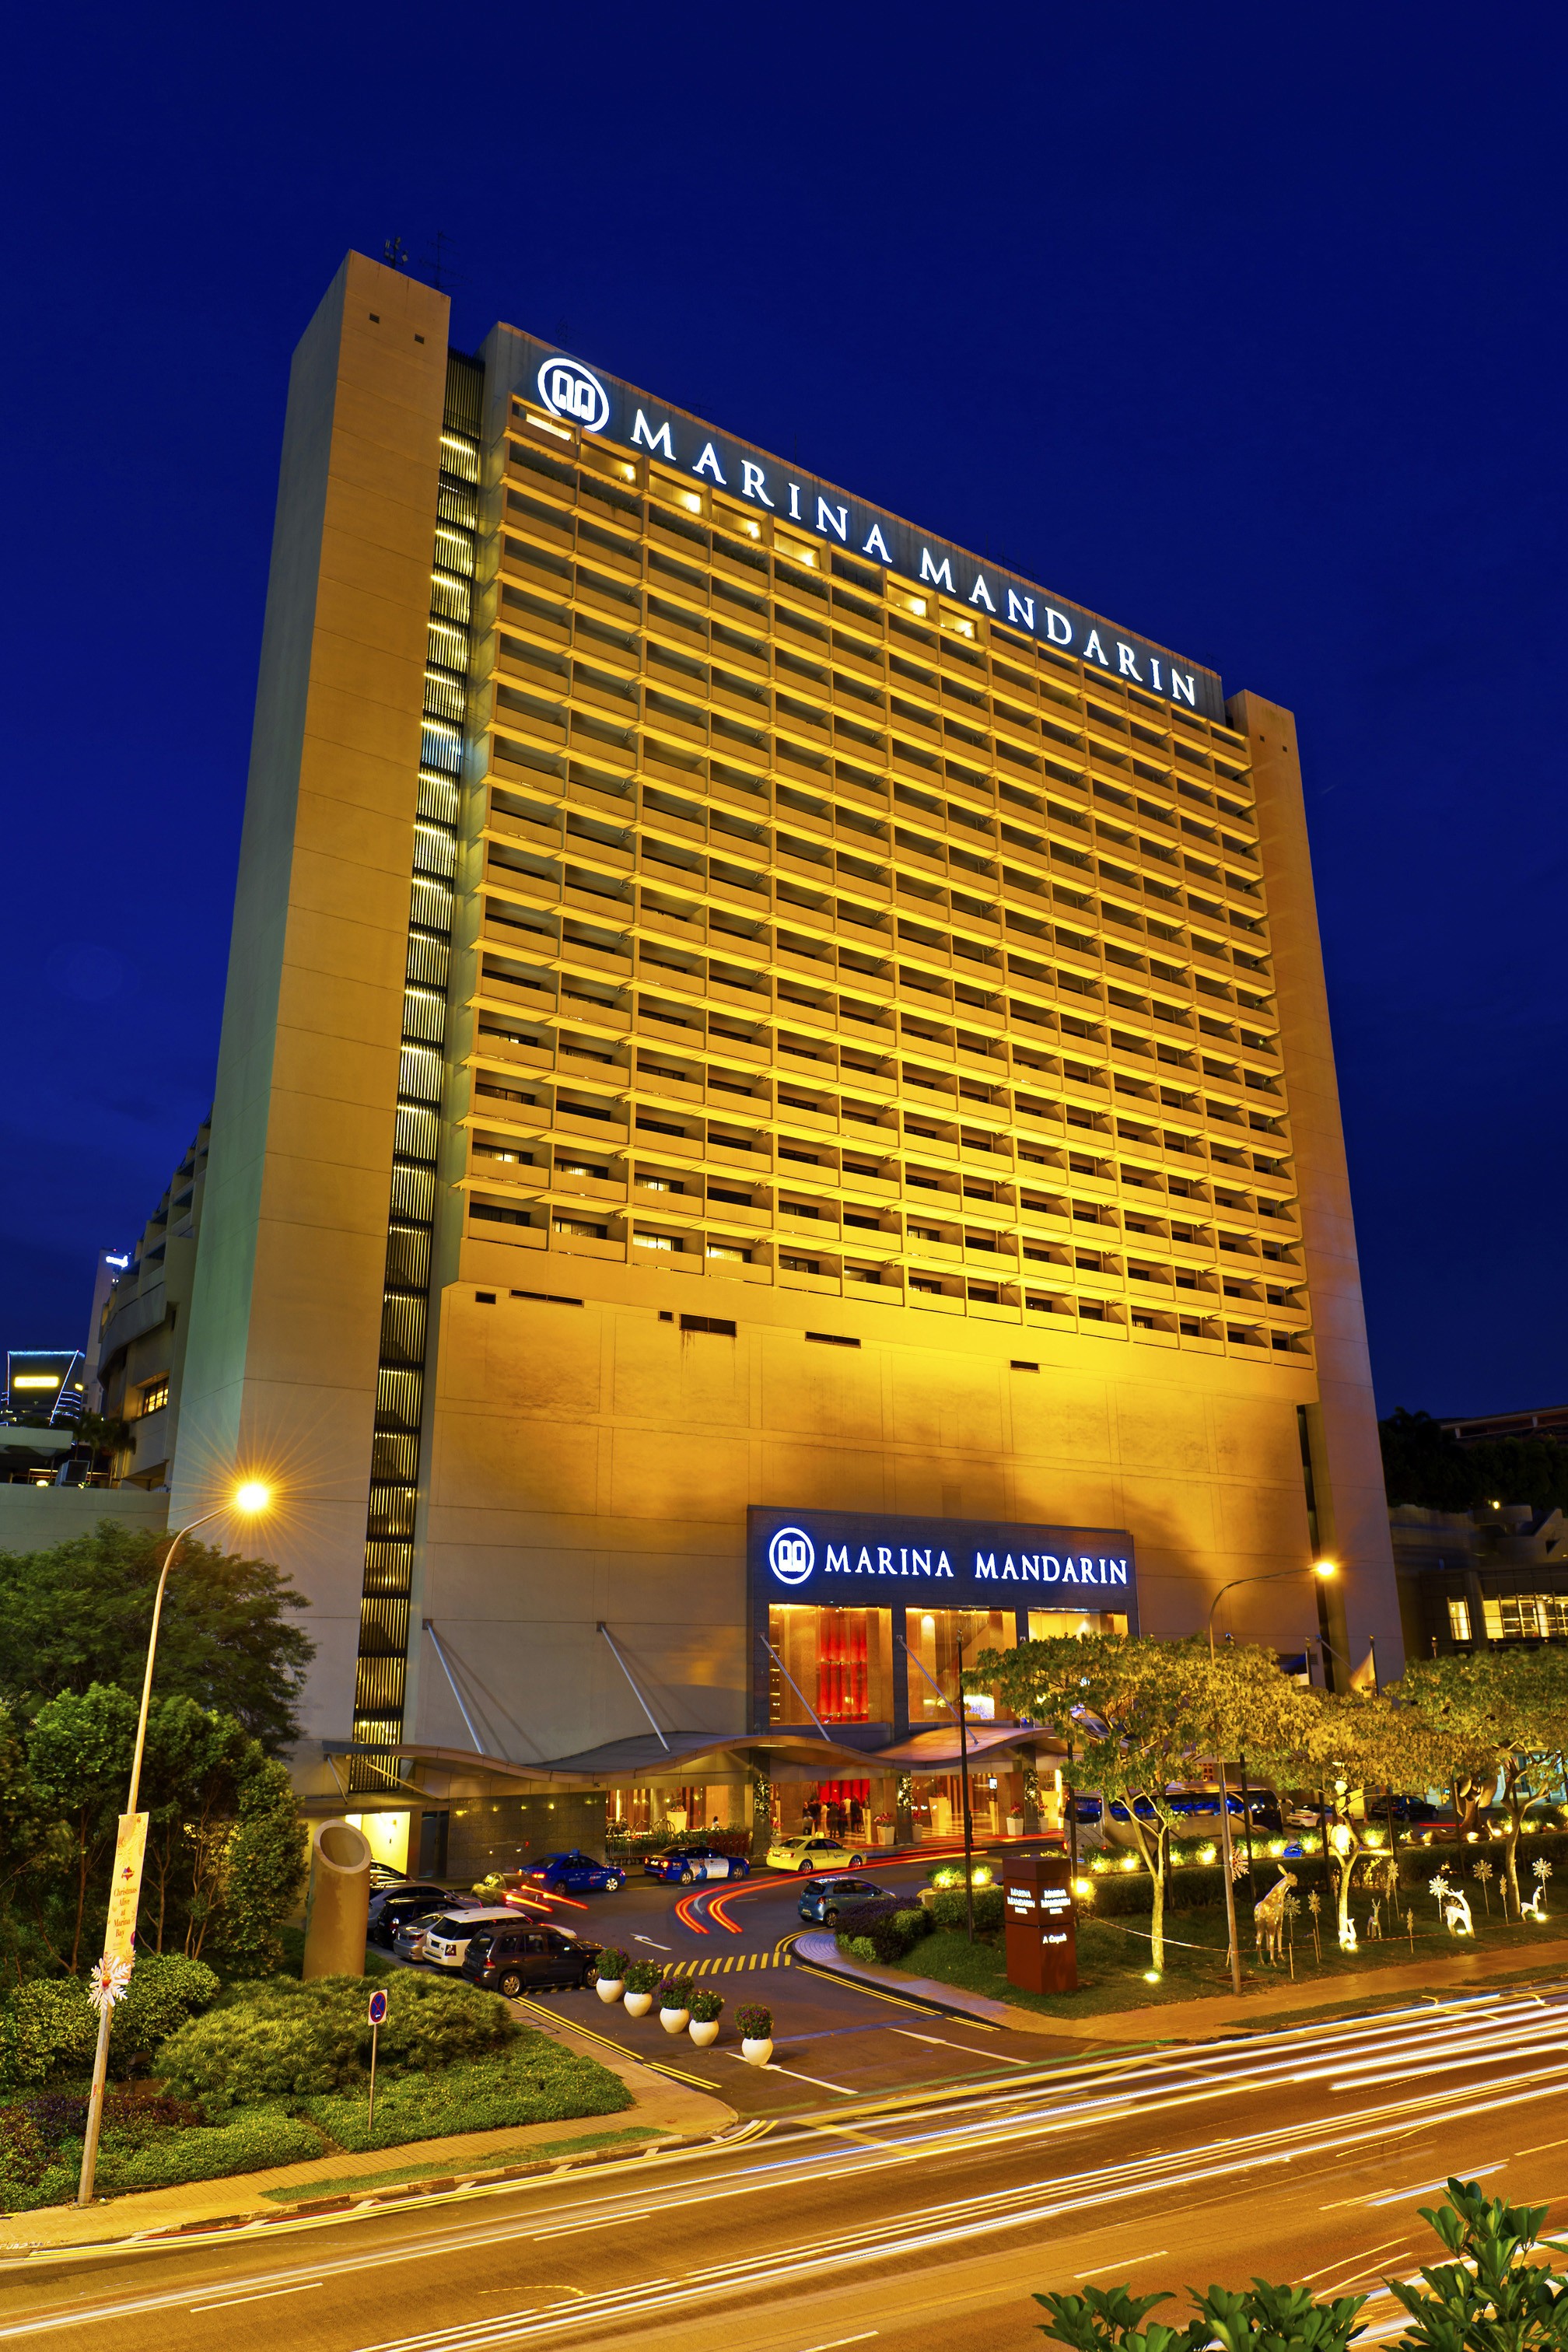 Stay at the Marina Mandarin Singapore or rent out one of its suites for the Grand Prix.